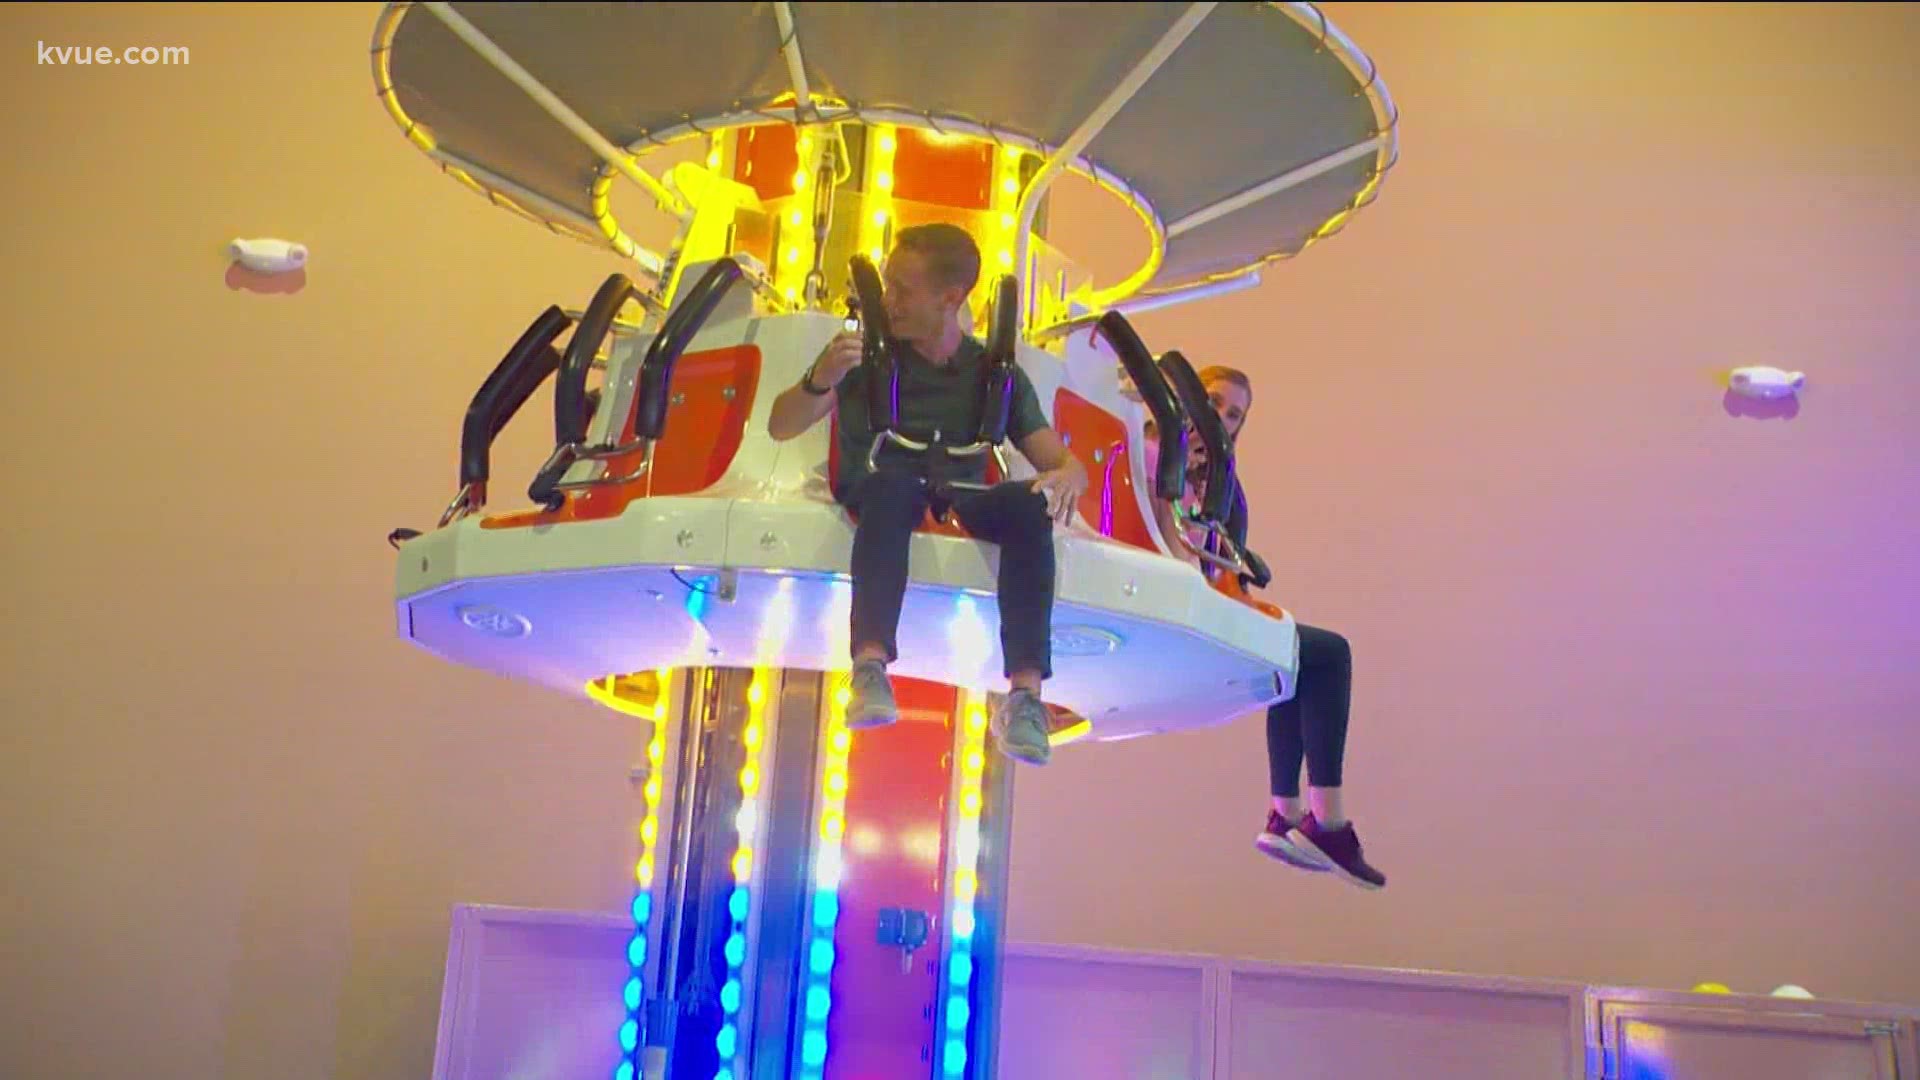 If you're into thrills and competition, one indoor adventure park in Pflugerville should be up your alley! The KVUE Daybreak team took a trip to REVL Social Club.